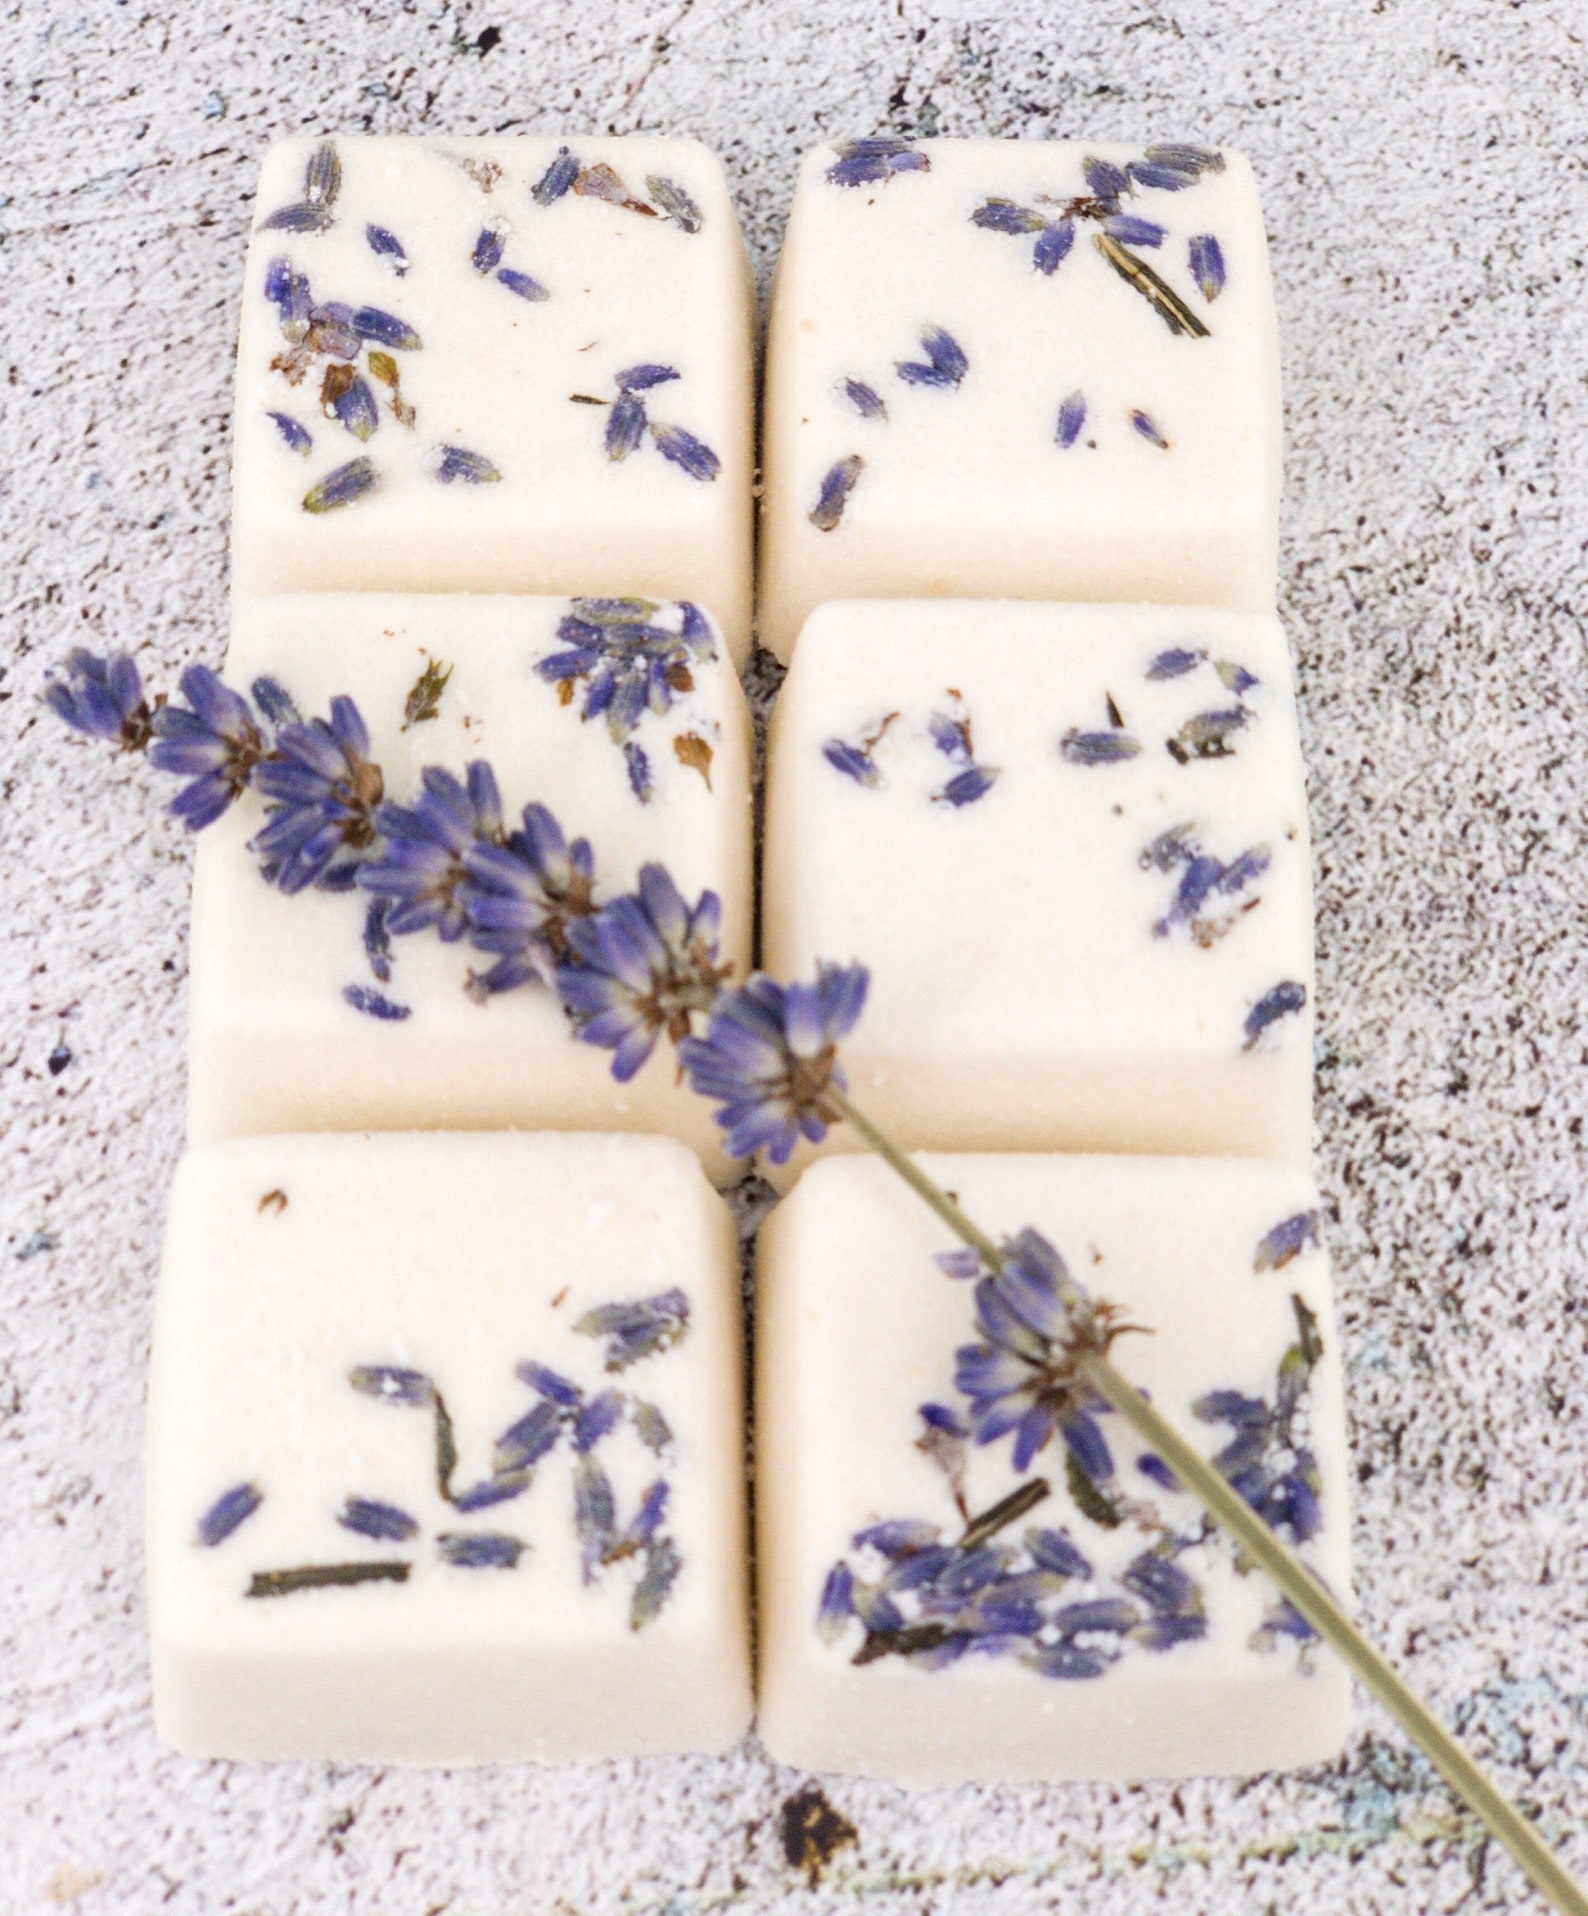 The pack of lavender shower steamers next to some fresh lavender